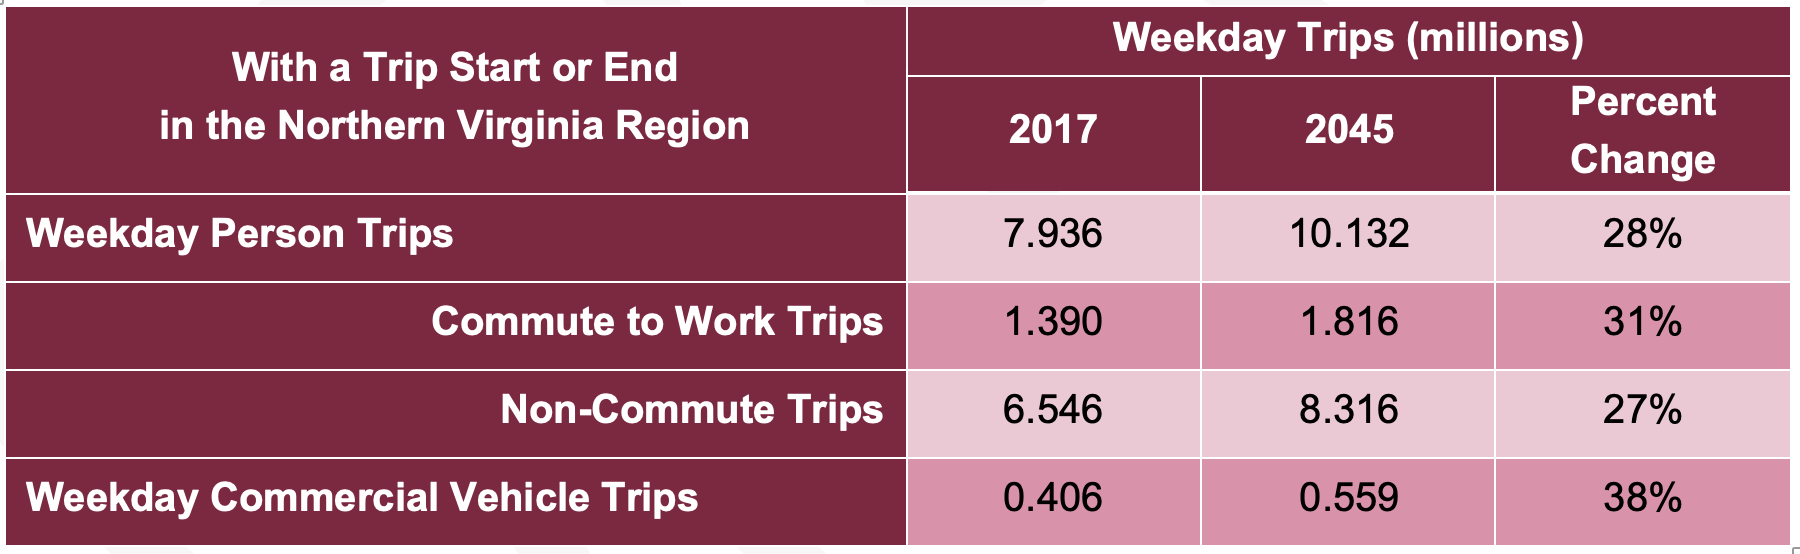 Chart showing weekday trips in millions with a trip starting or ending in the Northern Virginia Region. In 2017, there were 7.936 weekday person trips; In 2045 it's projected to be 10.132 which represents a 28% change. Commute to work trips were 1.390 in 2017 and projected to be 1.816 in 2045 which represents a 31% change. Non-commute trips were 6.546 in 2017 and projected to be 8.316 in 2045 which represents a 27% change. Weekday commercial Vehicle Trips were 0.406 in 2017 and projected to be 0.559 in 2045 which represents a 38% change.